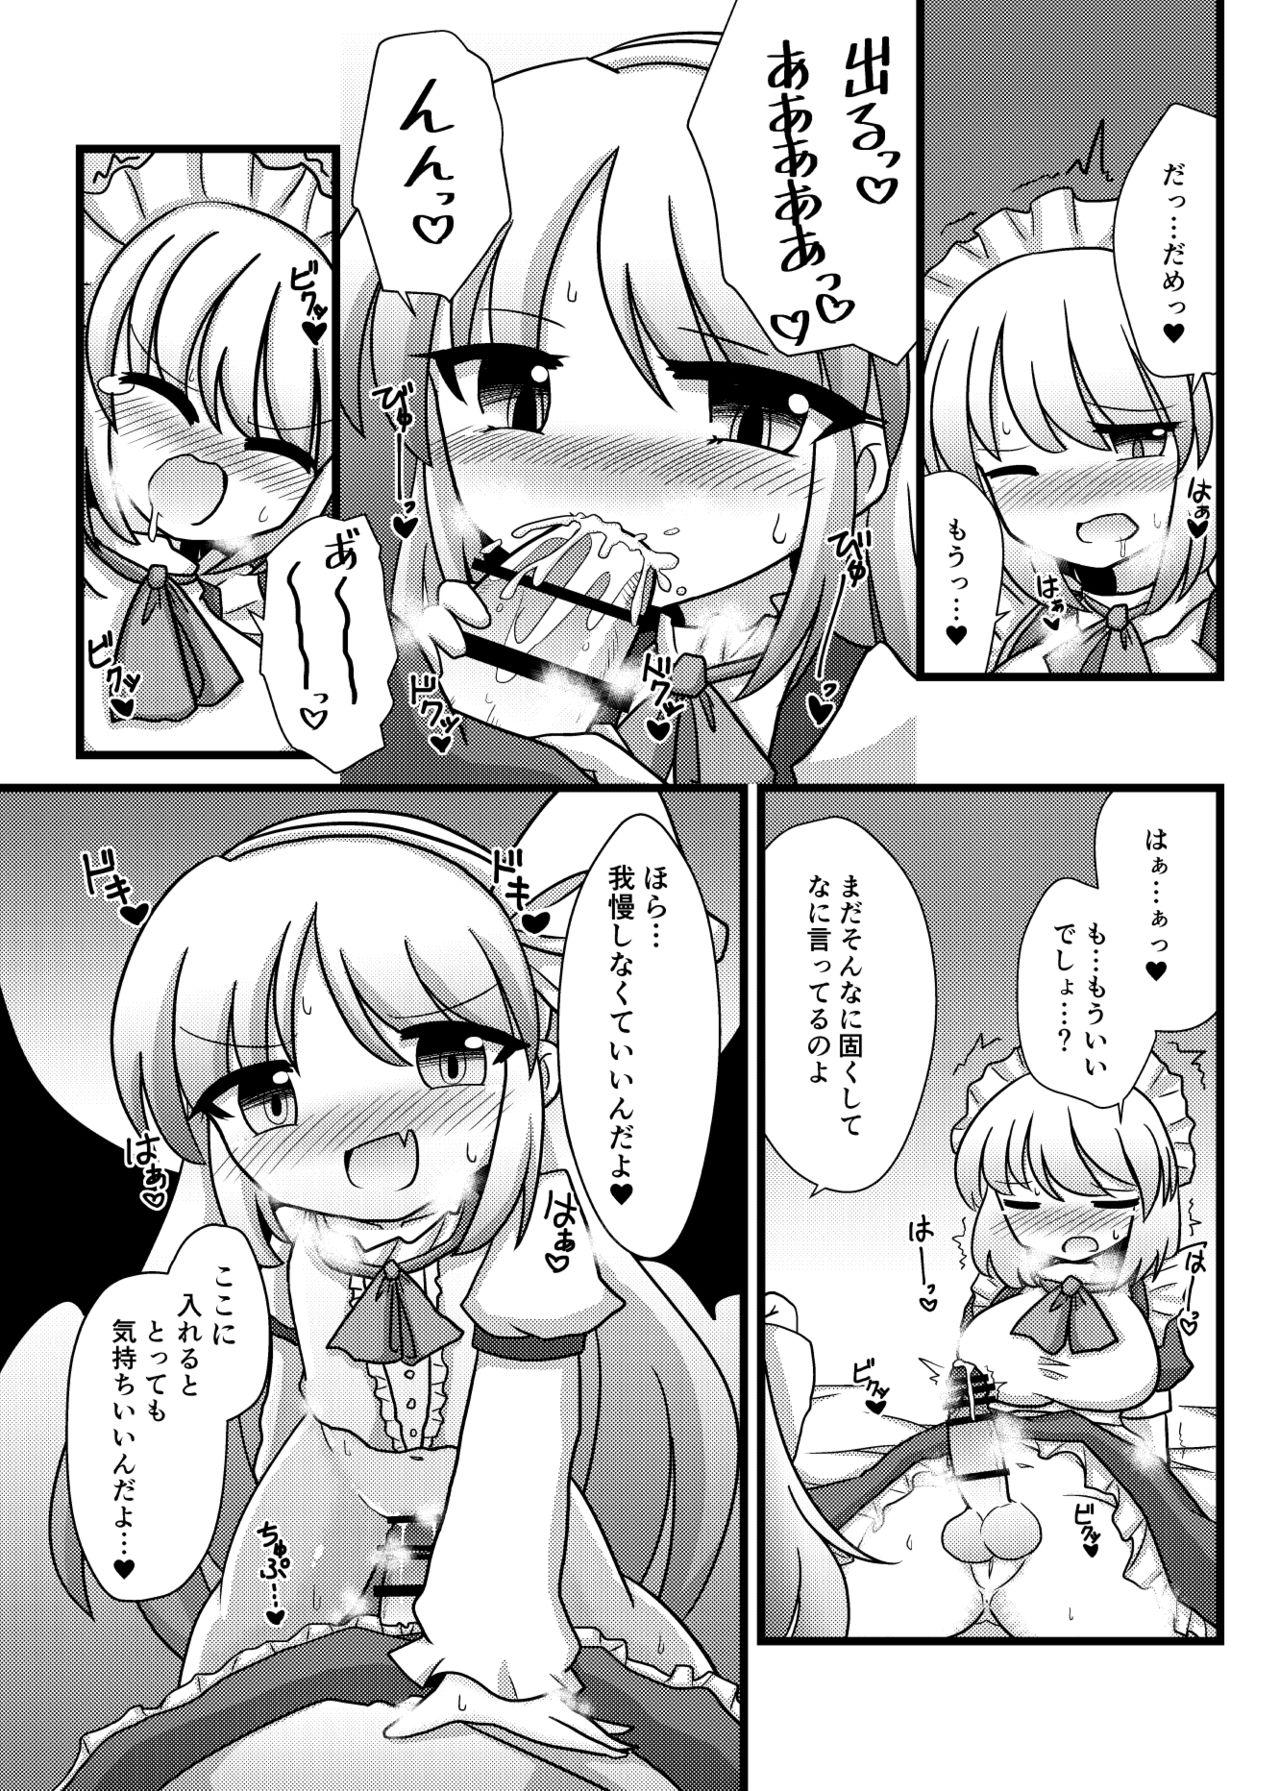 Teenpussy 旧作エロ合同に寄稿した漫画 - Touhou project Gay Interracial - Page 3